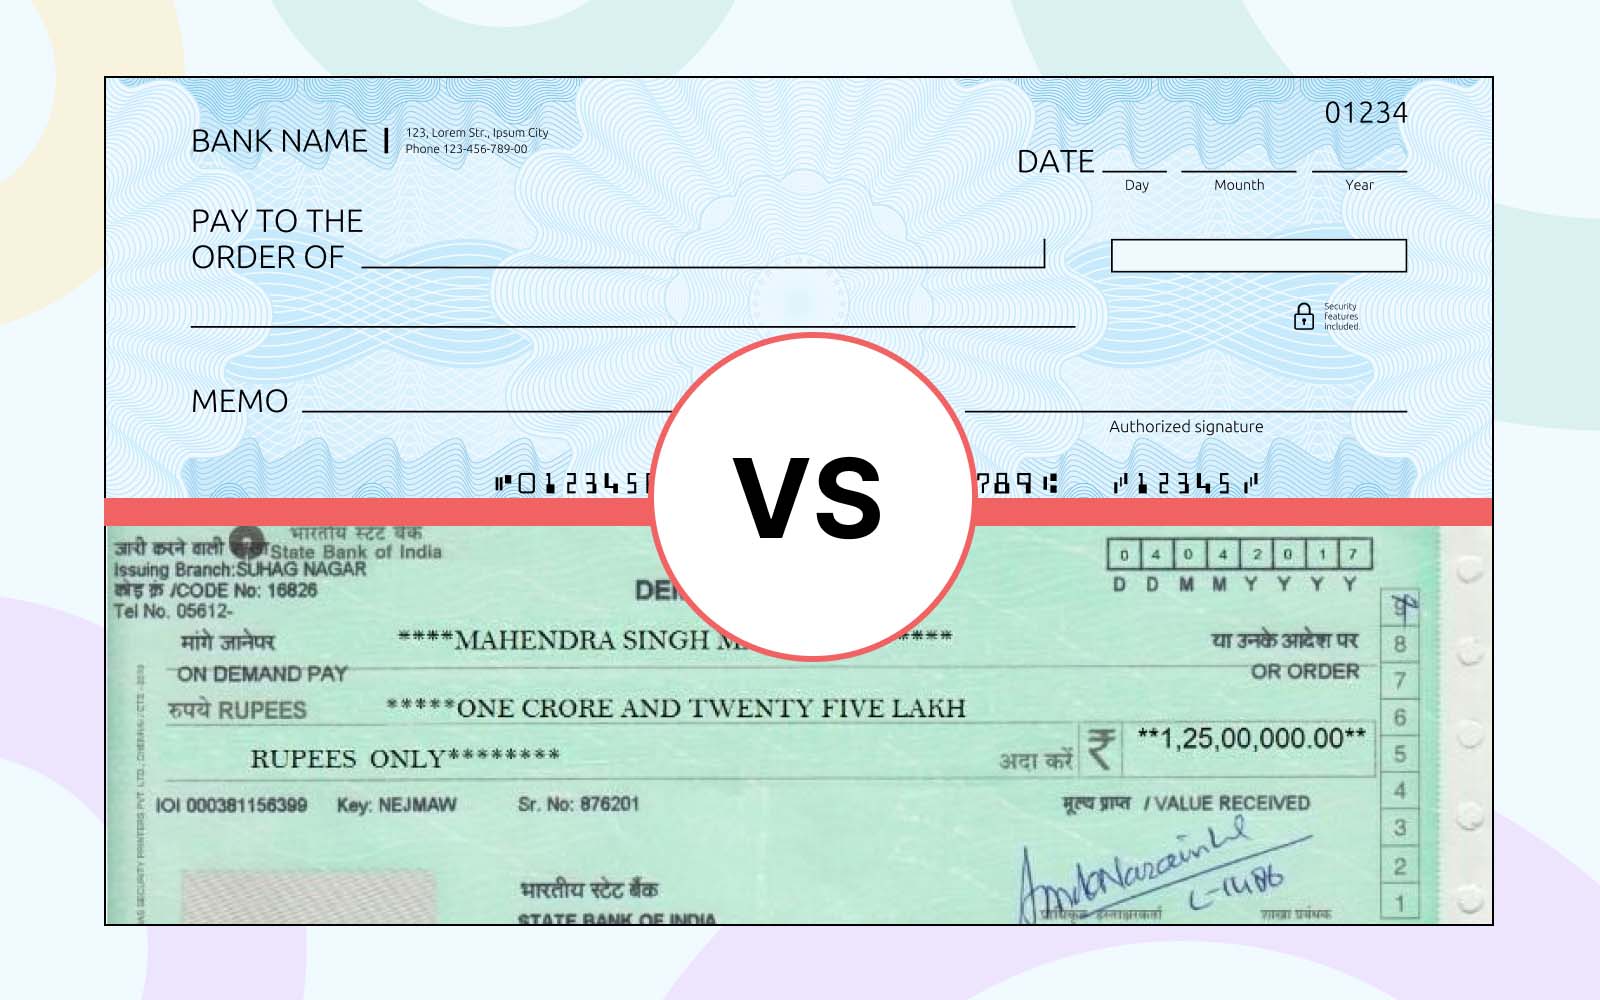 Cross Cheque Meaning